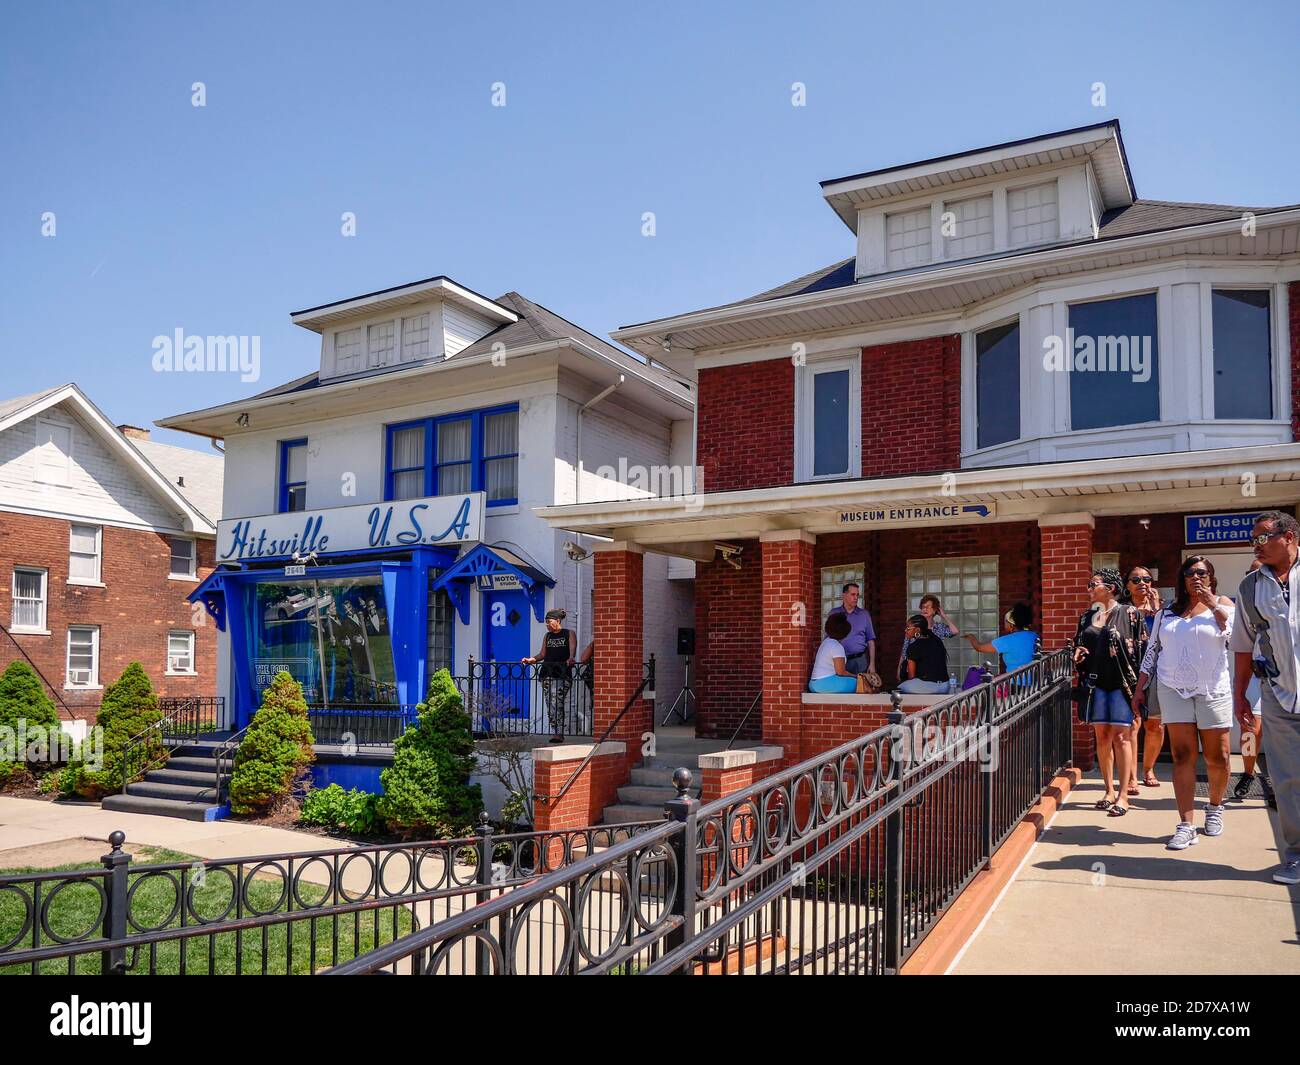 Detroit home of Motown records Stock Photo